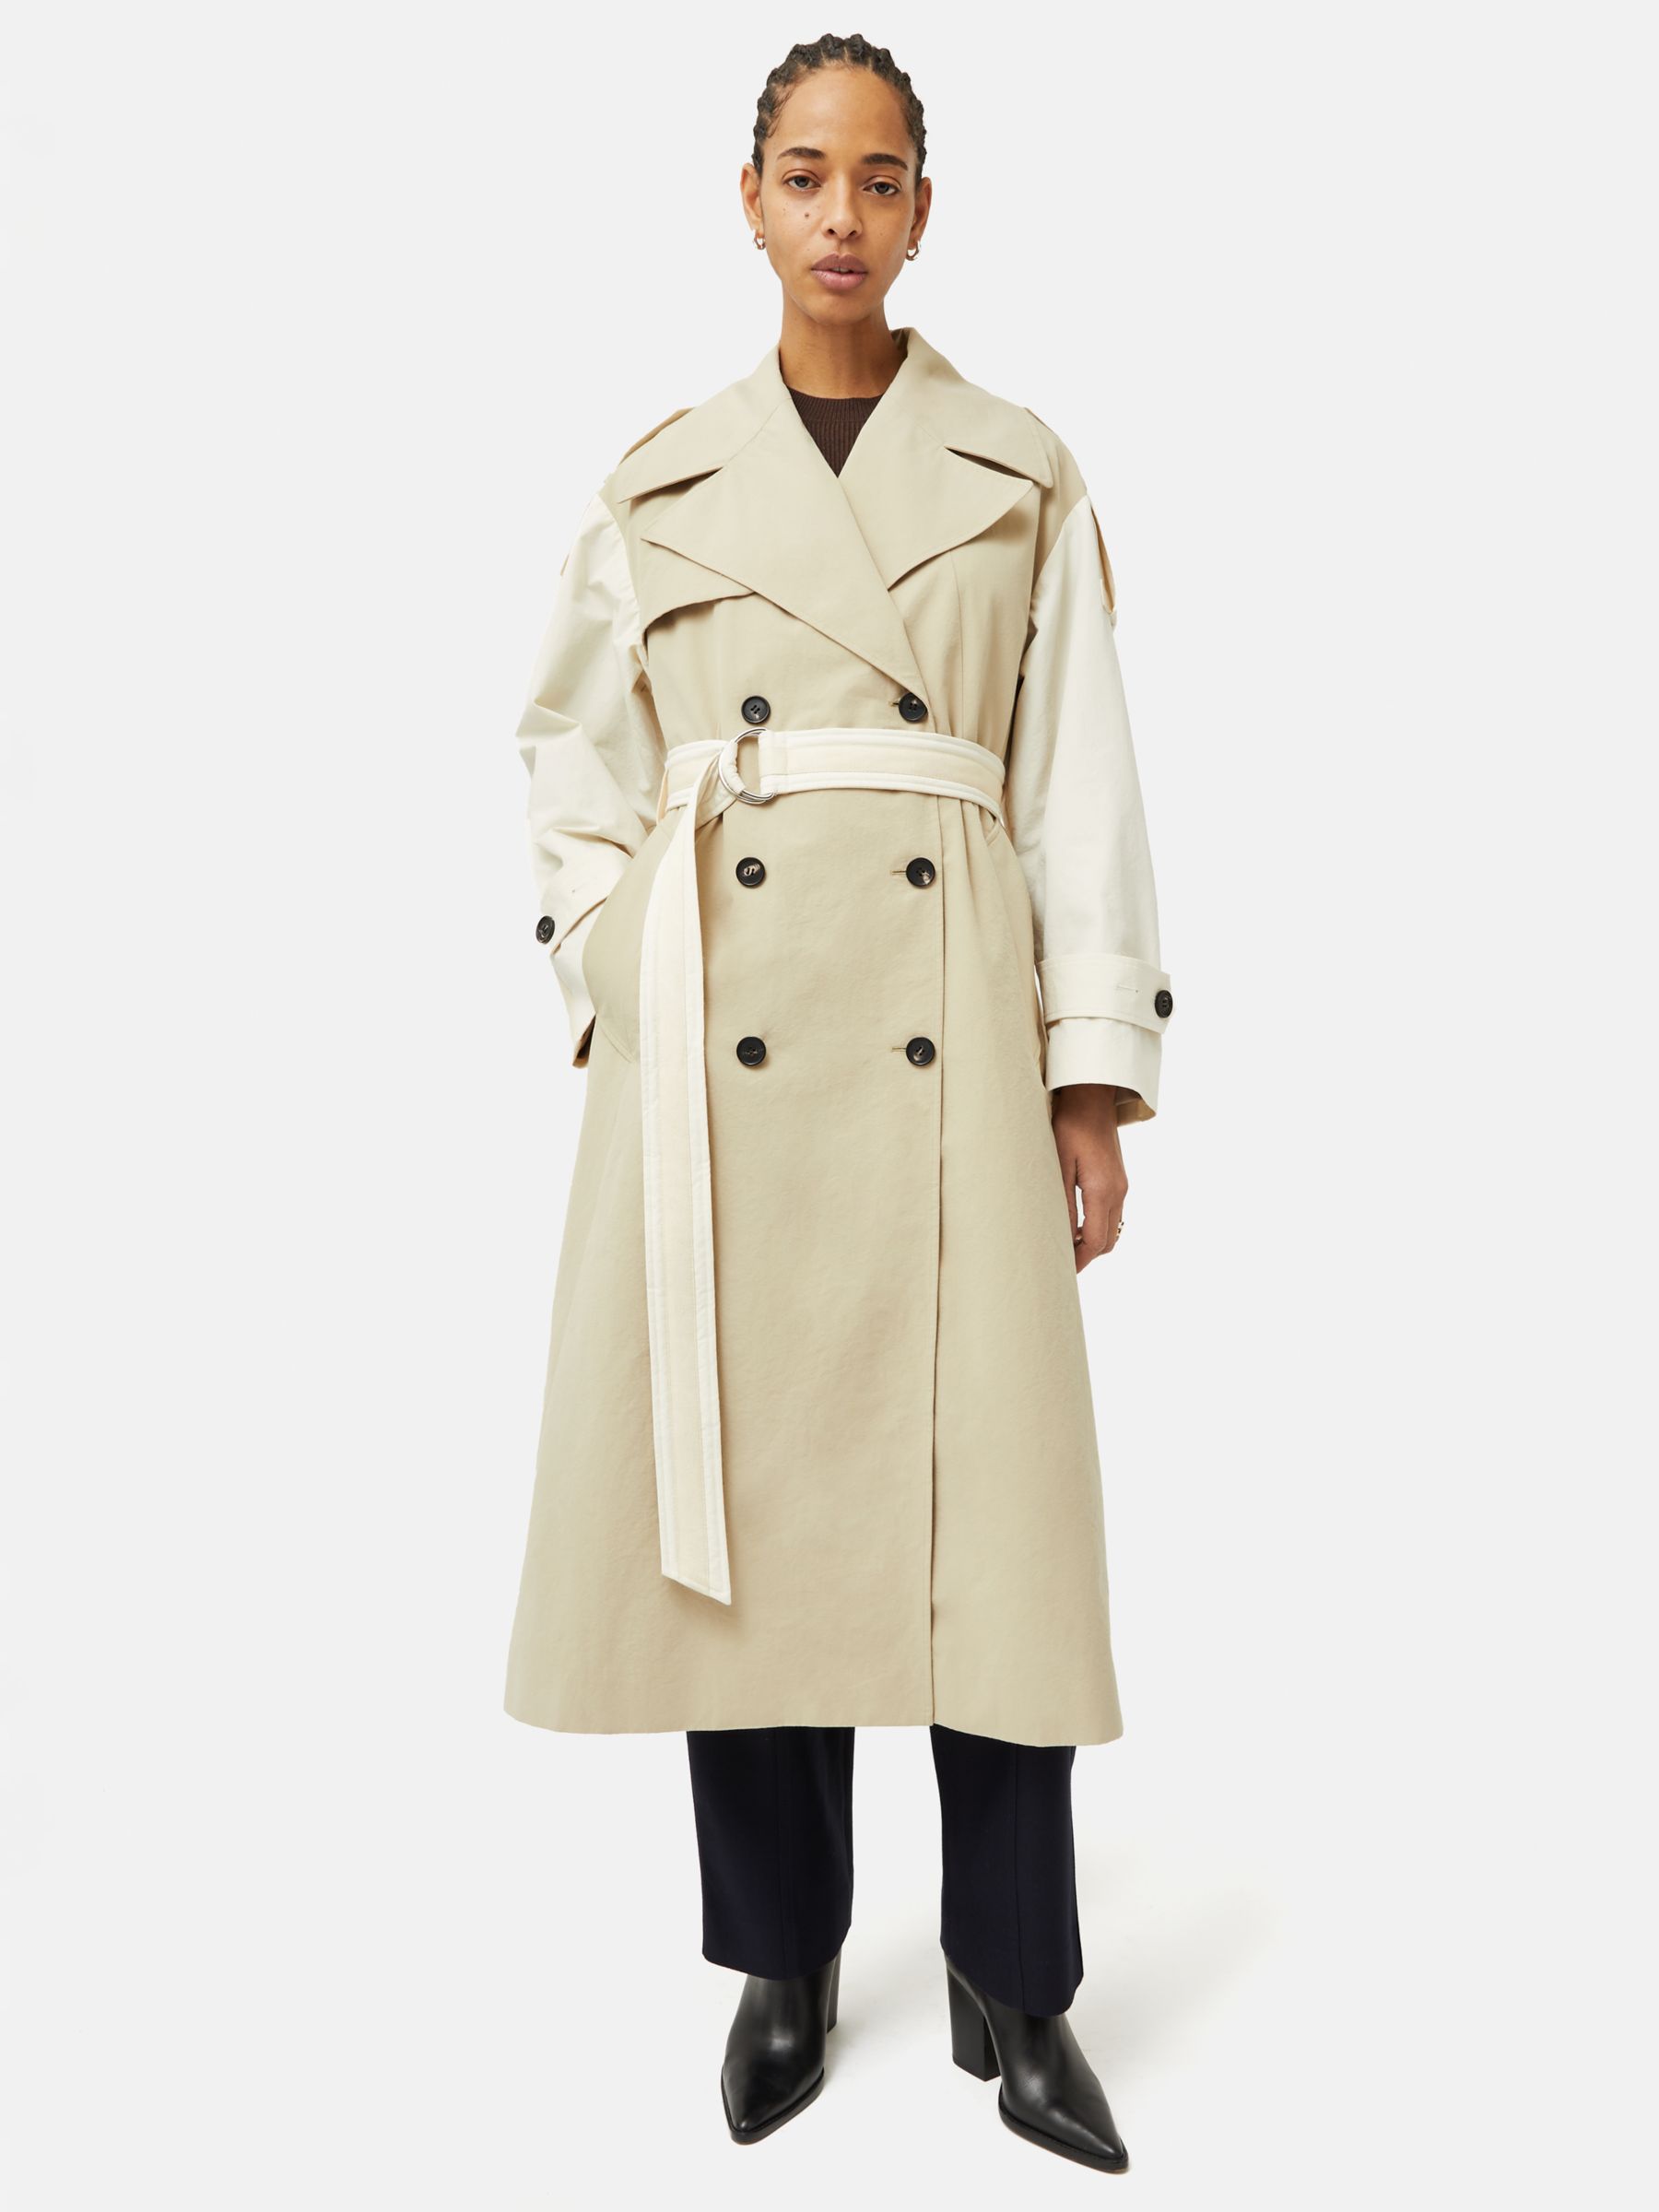 Jigsaw Double Breasted Panelled Trench Coat, Cream at John Lewis & Partners